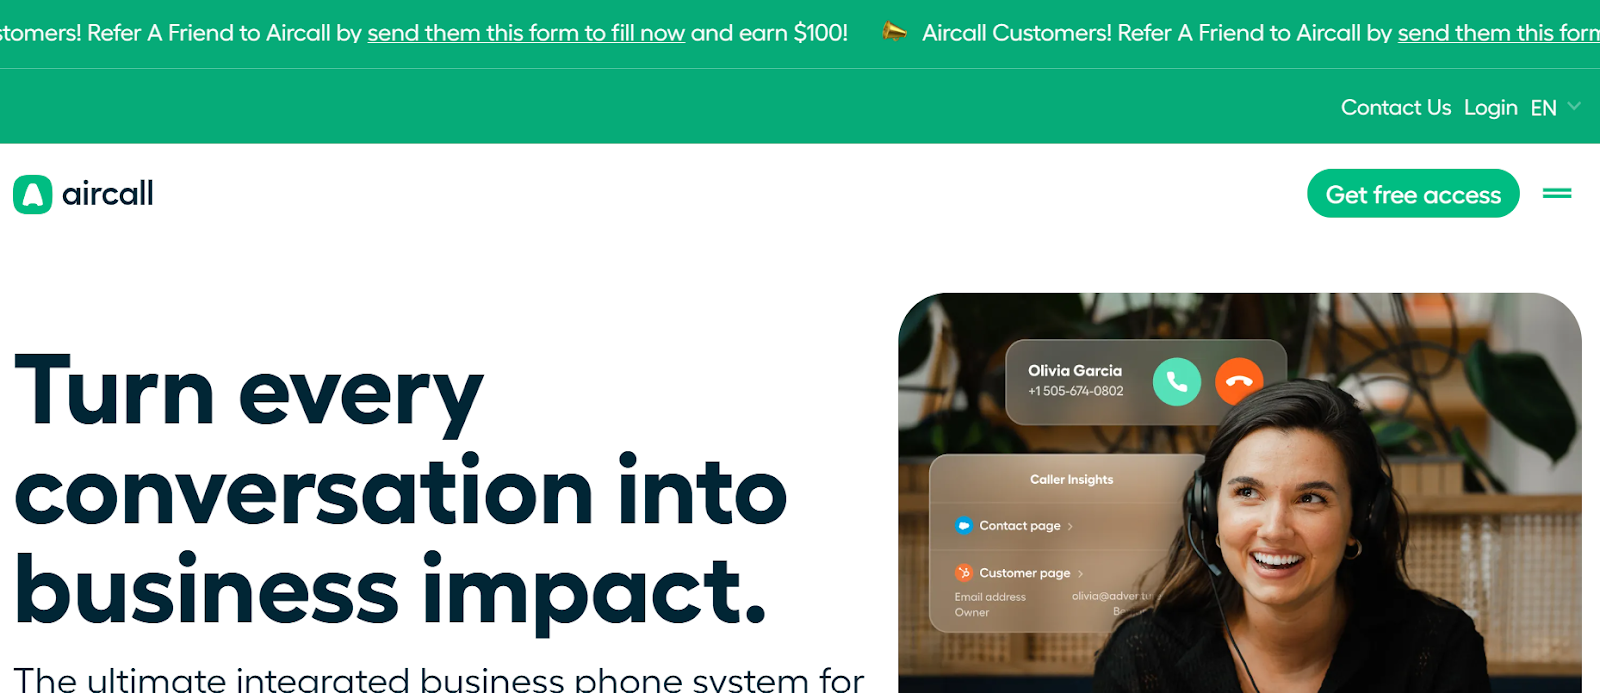 Aircall website snapshot highlighting the services it offers.